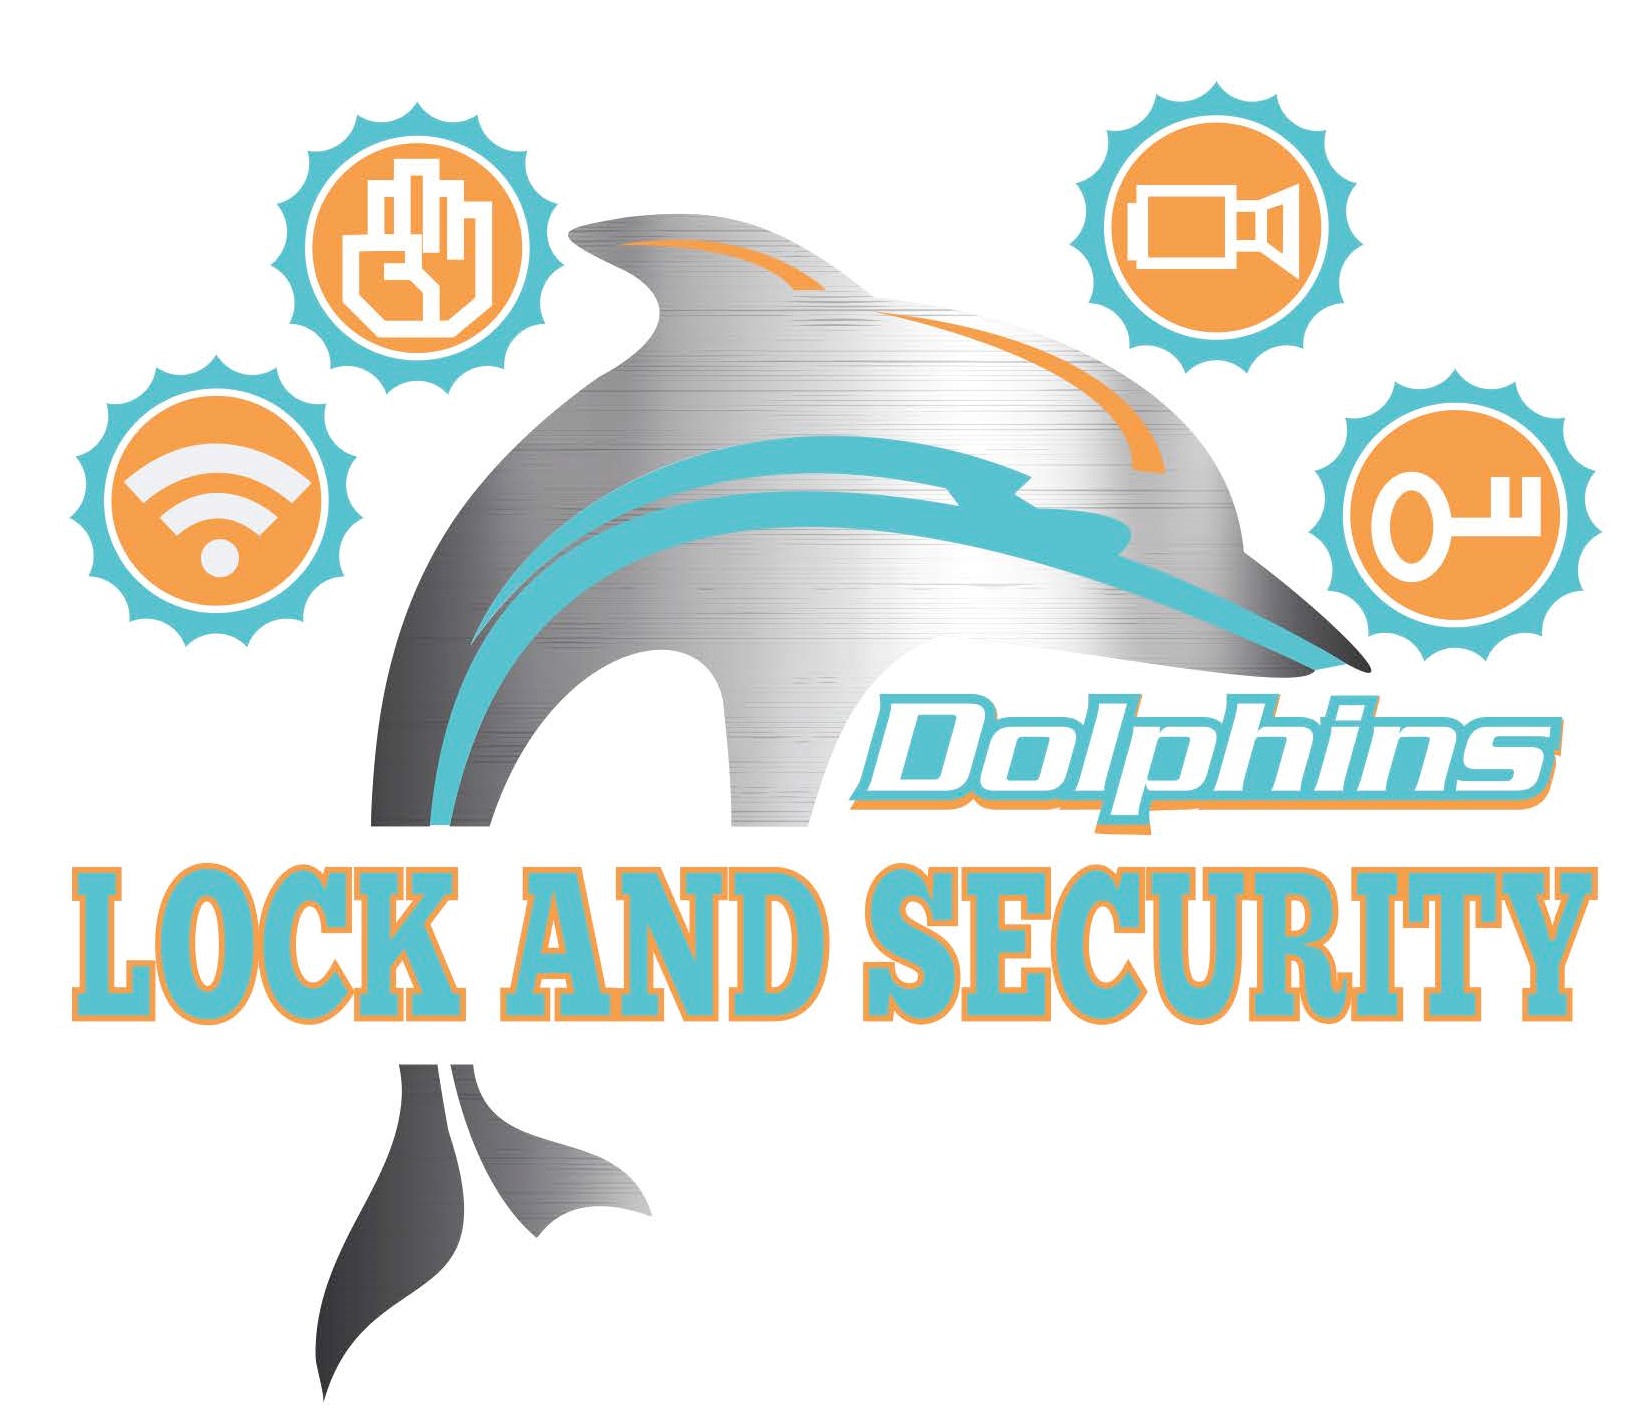 Dolphins Lock and Security